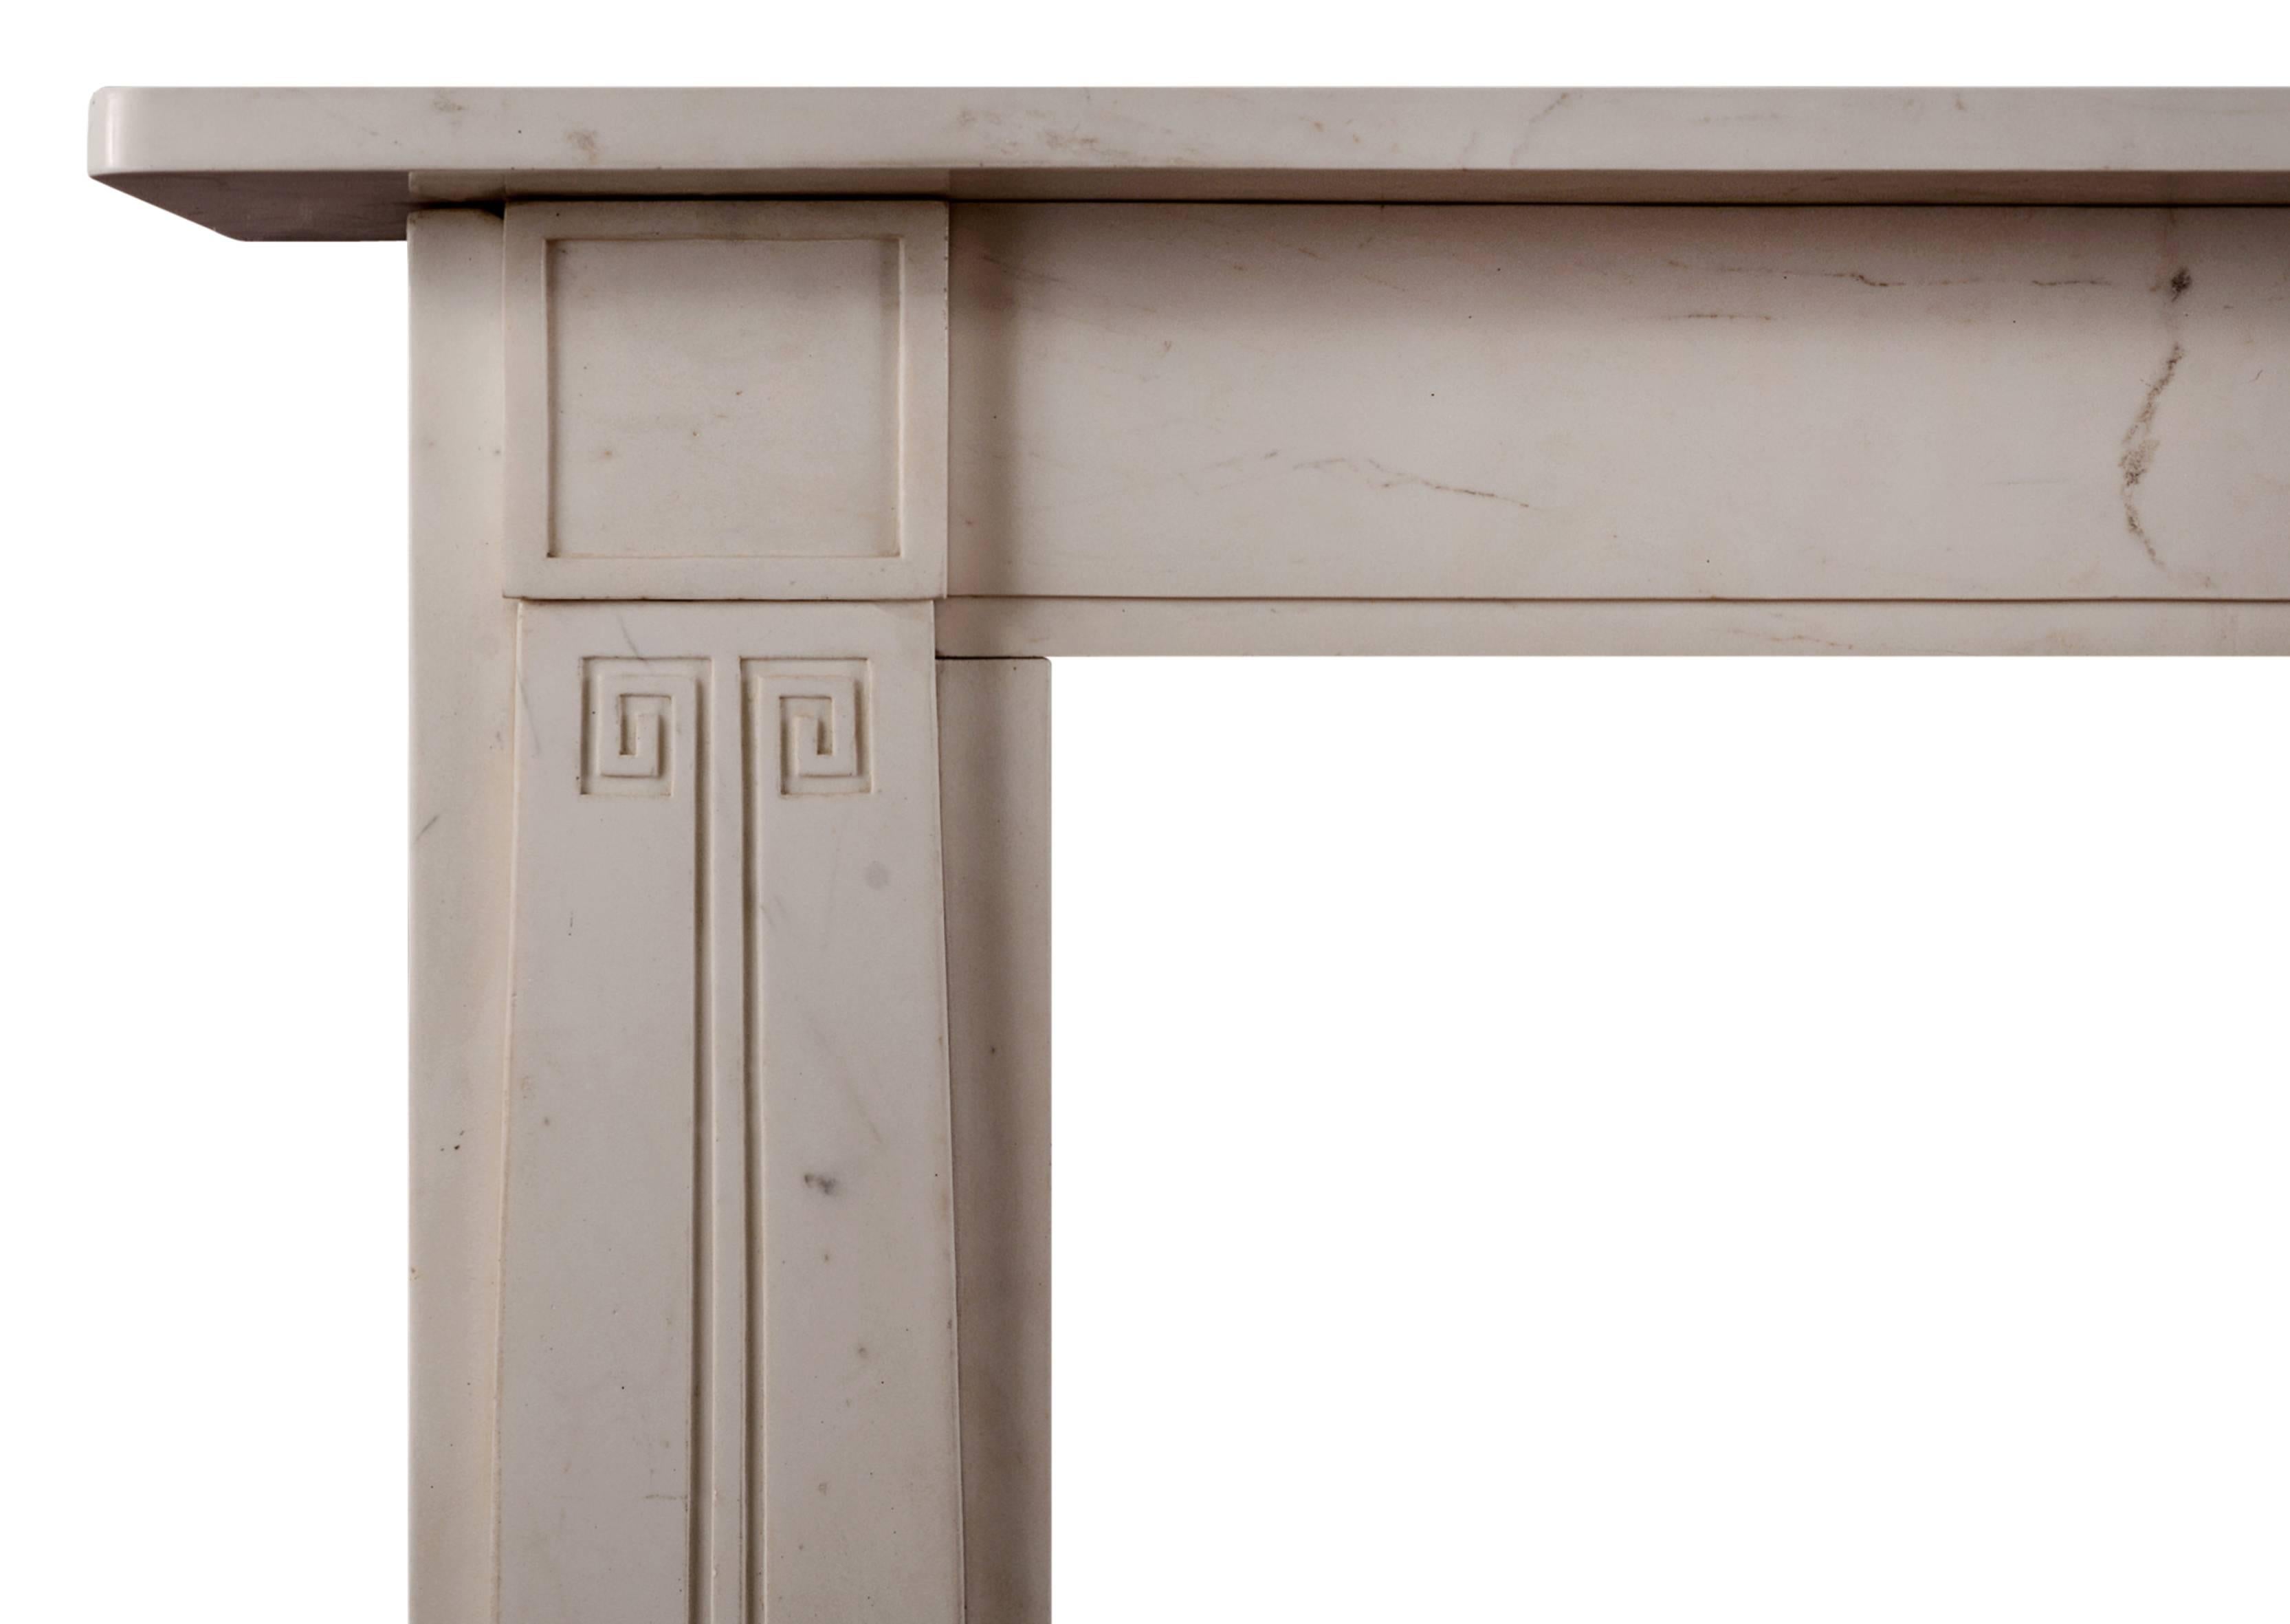 A white marble fireplace in the manner of Sir John Soane. The tapering jambs with Greek key decoration, surmounted by square panelled blockings. Plain frieze and shelf. English, based on an original piece.

N.B. May be subject to an extended lead